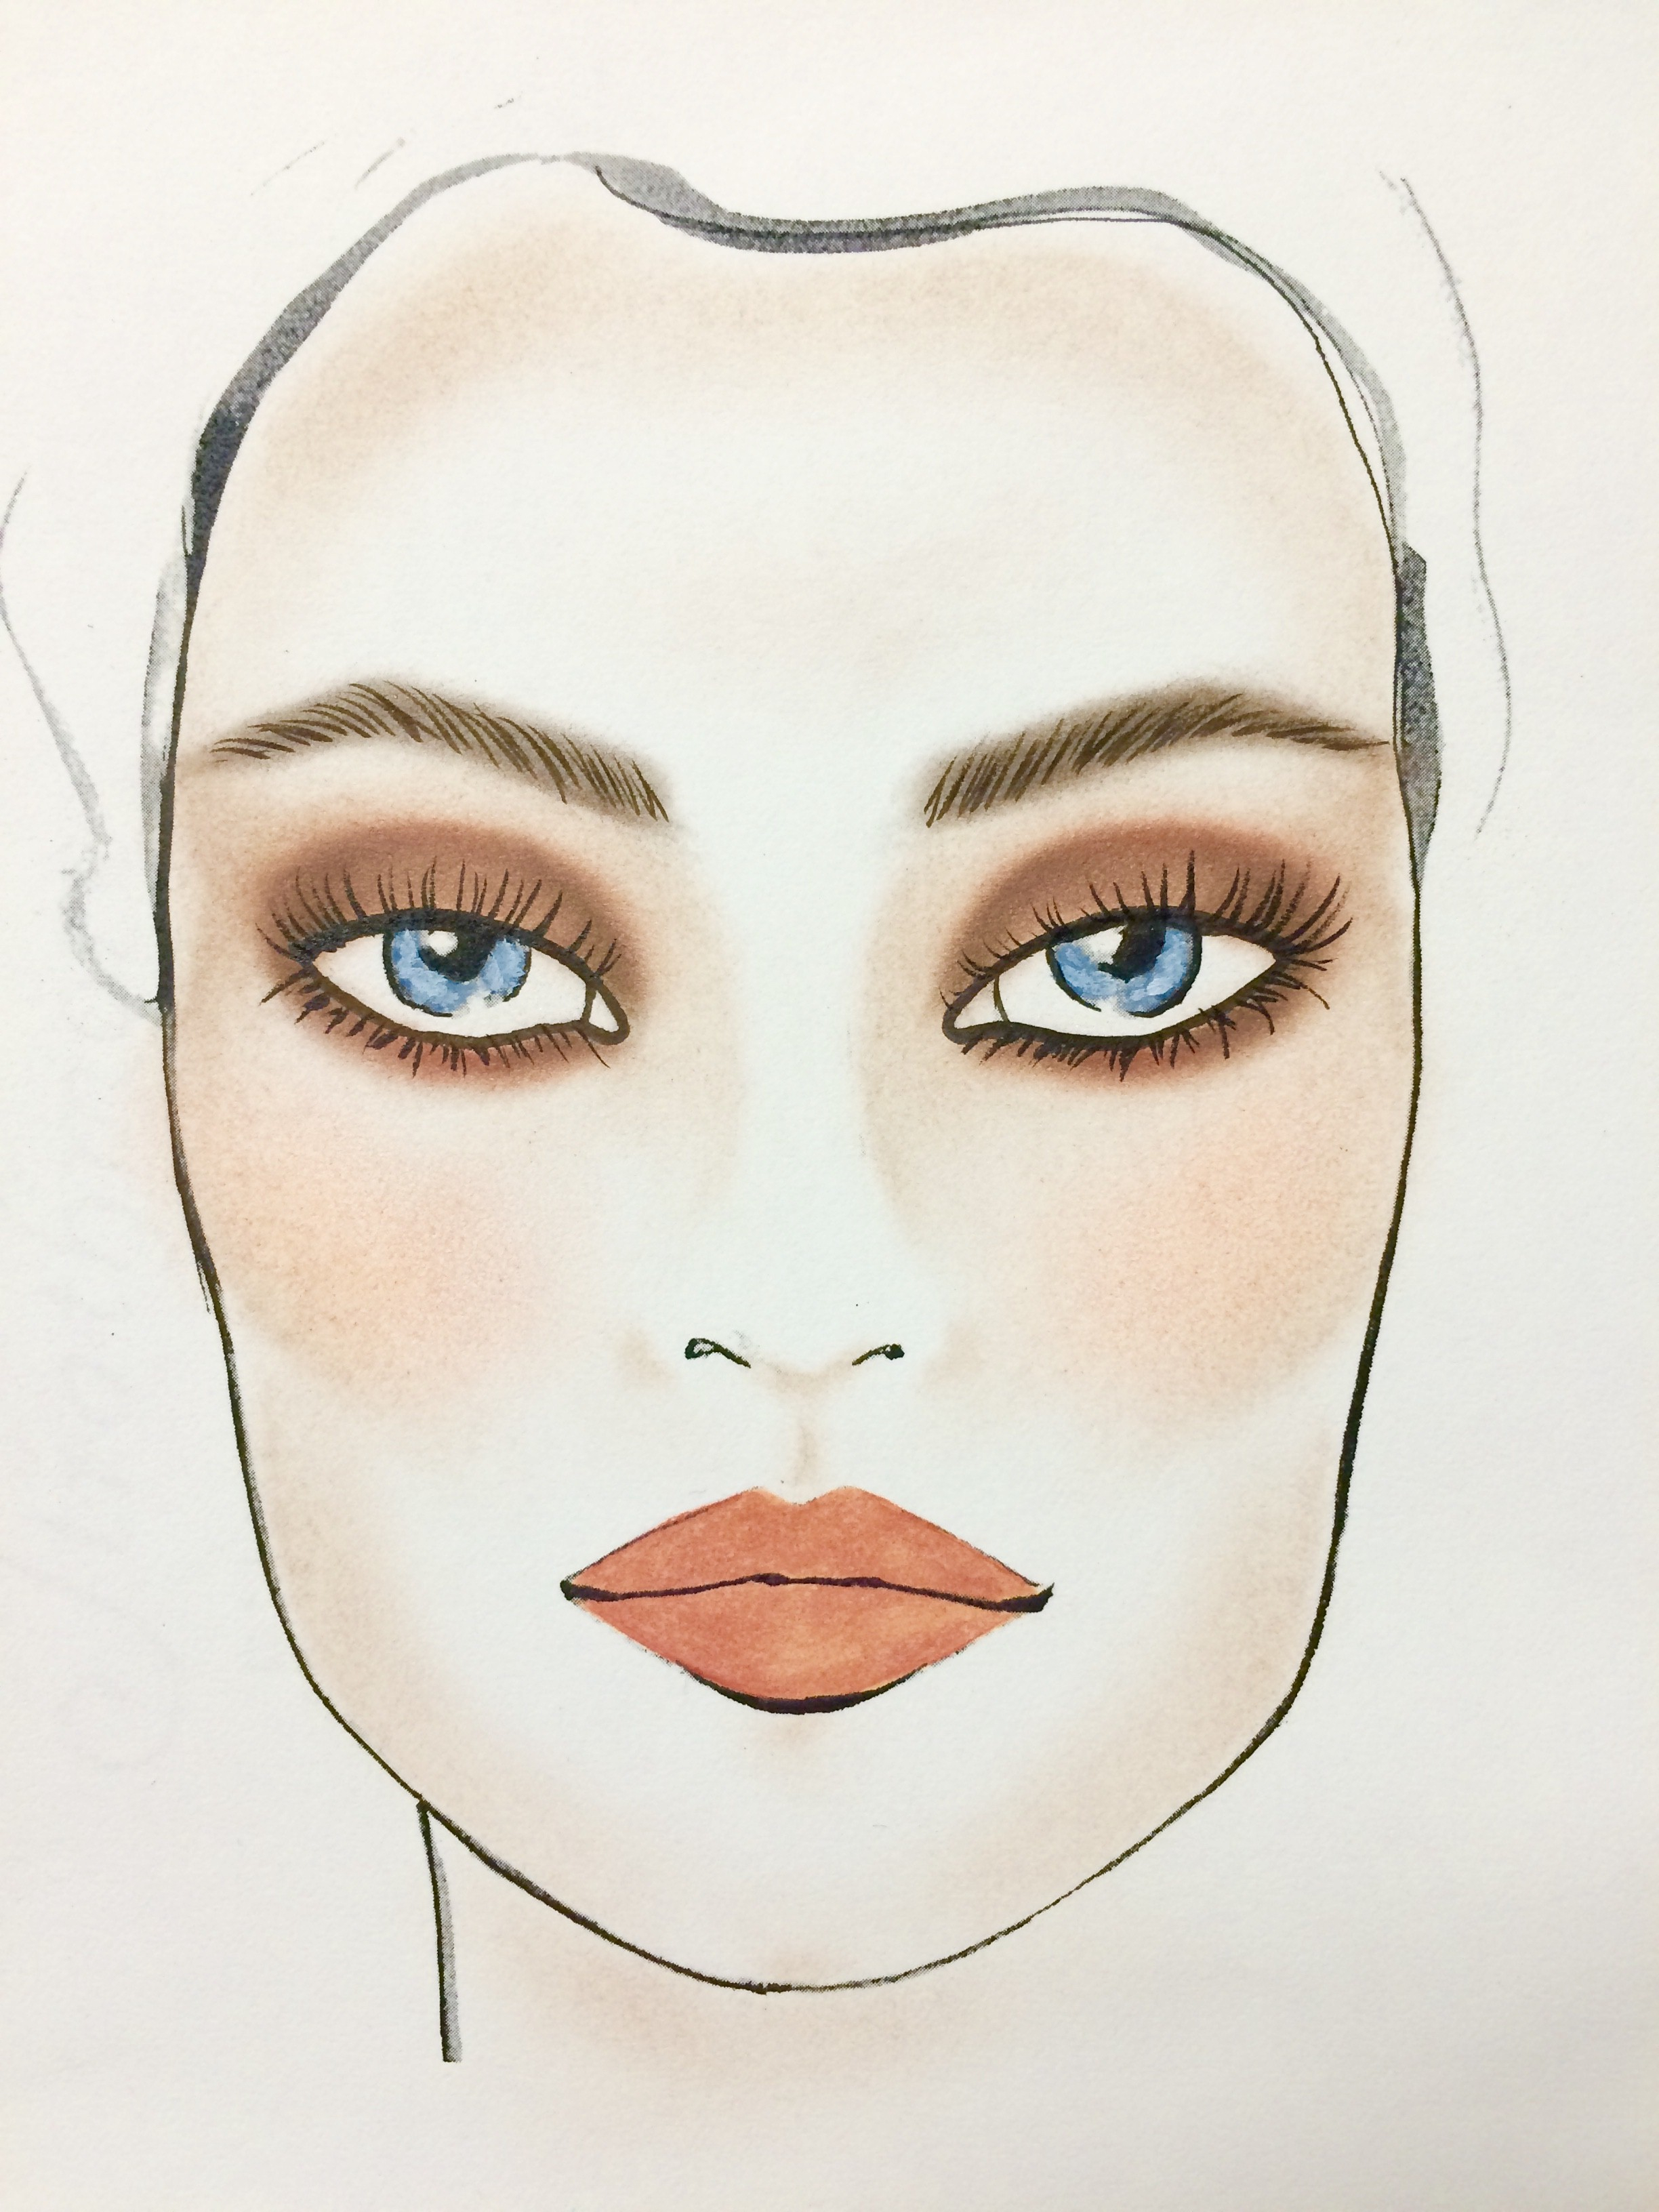 How To Do Makeup For Blue Eyes The Most Beautiful Makeup For Blue Eyes Huffpost Life